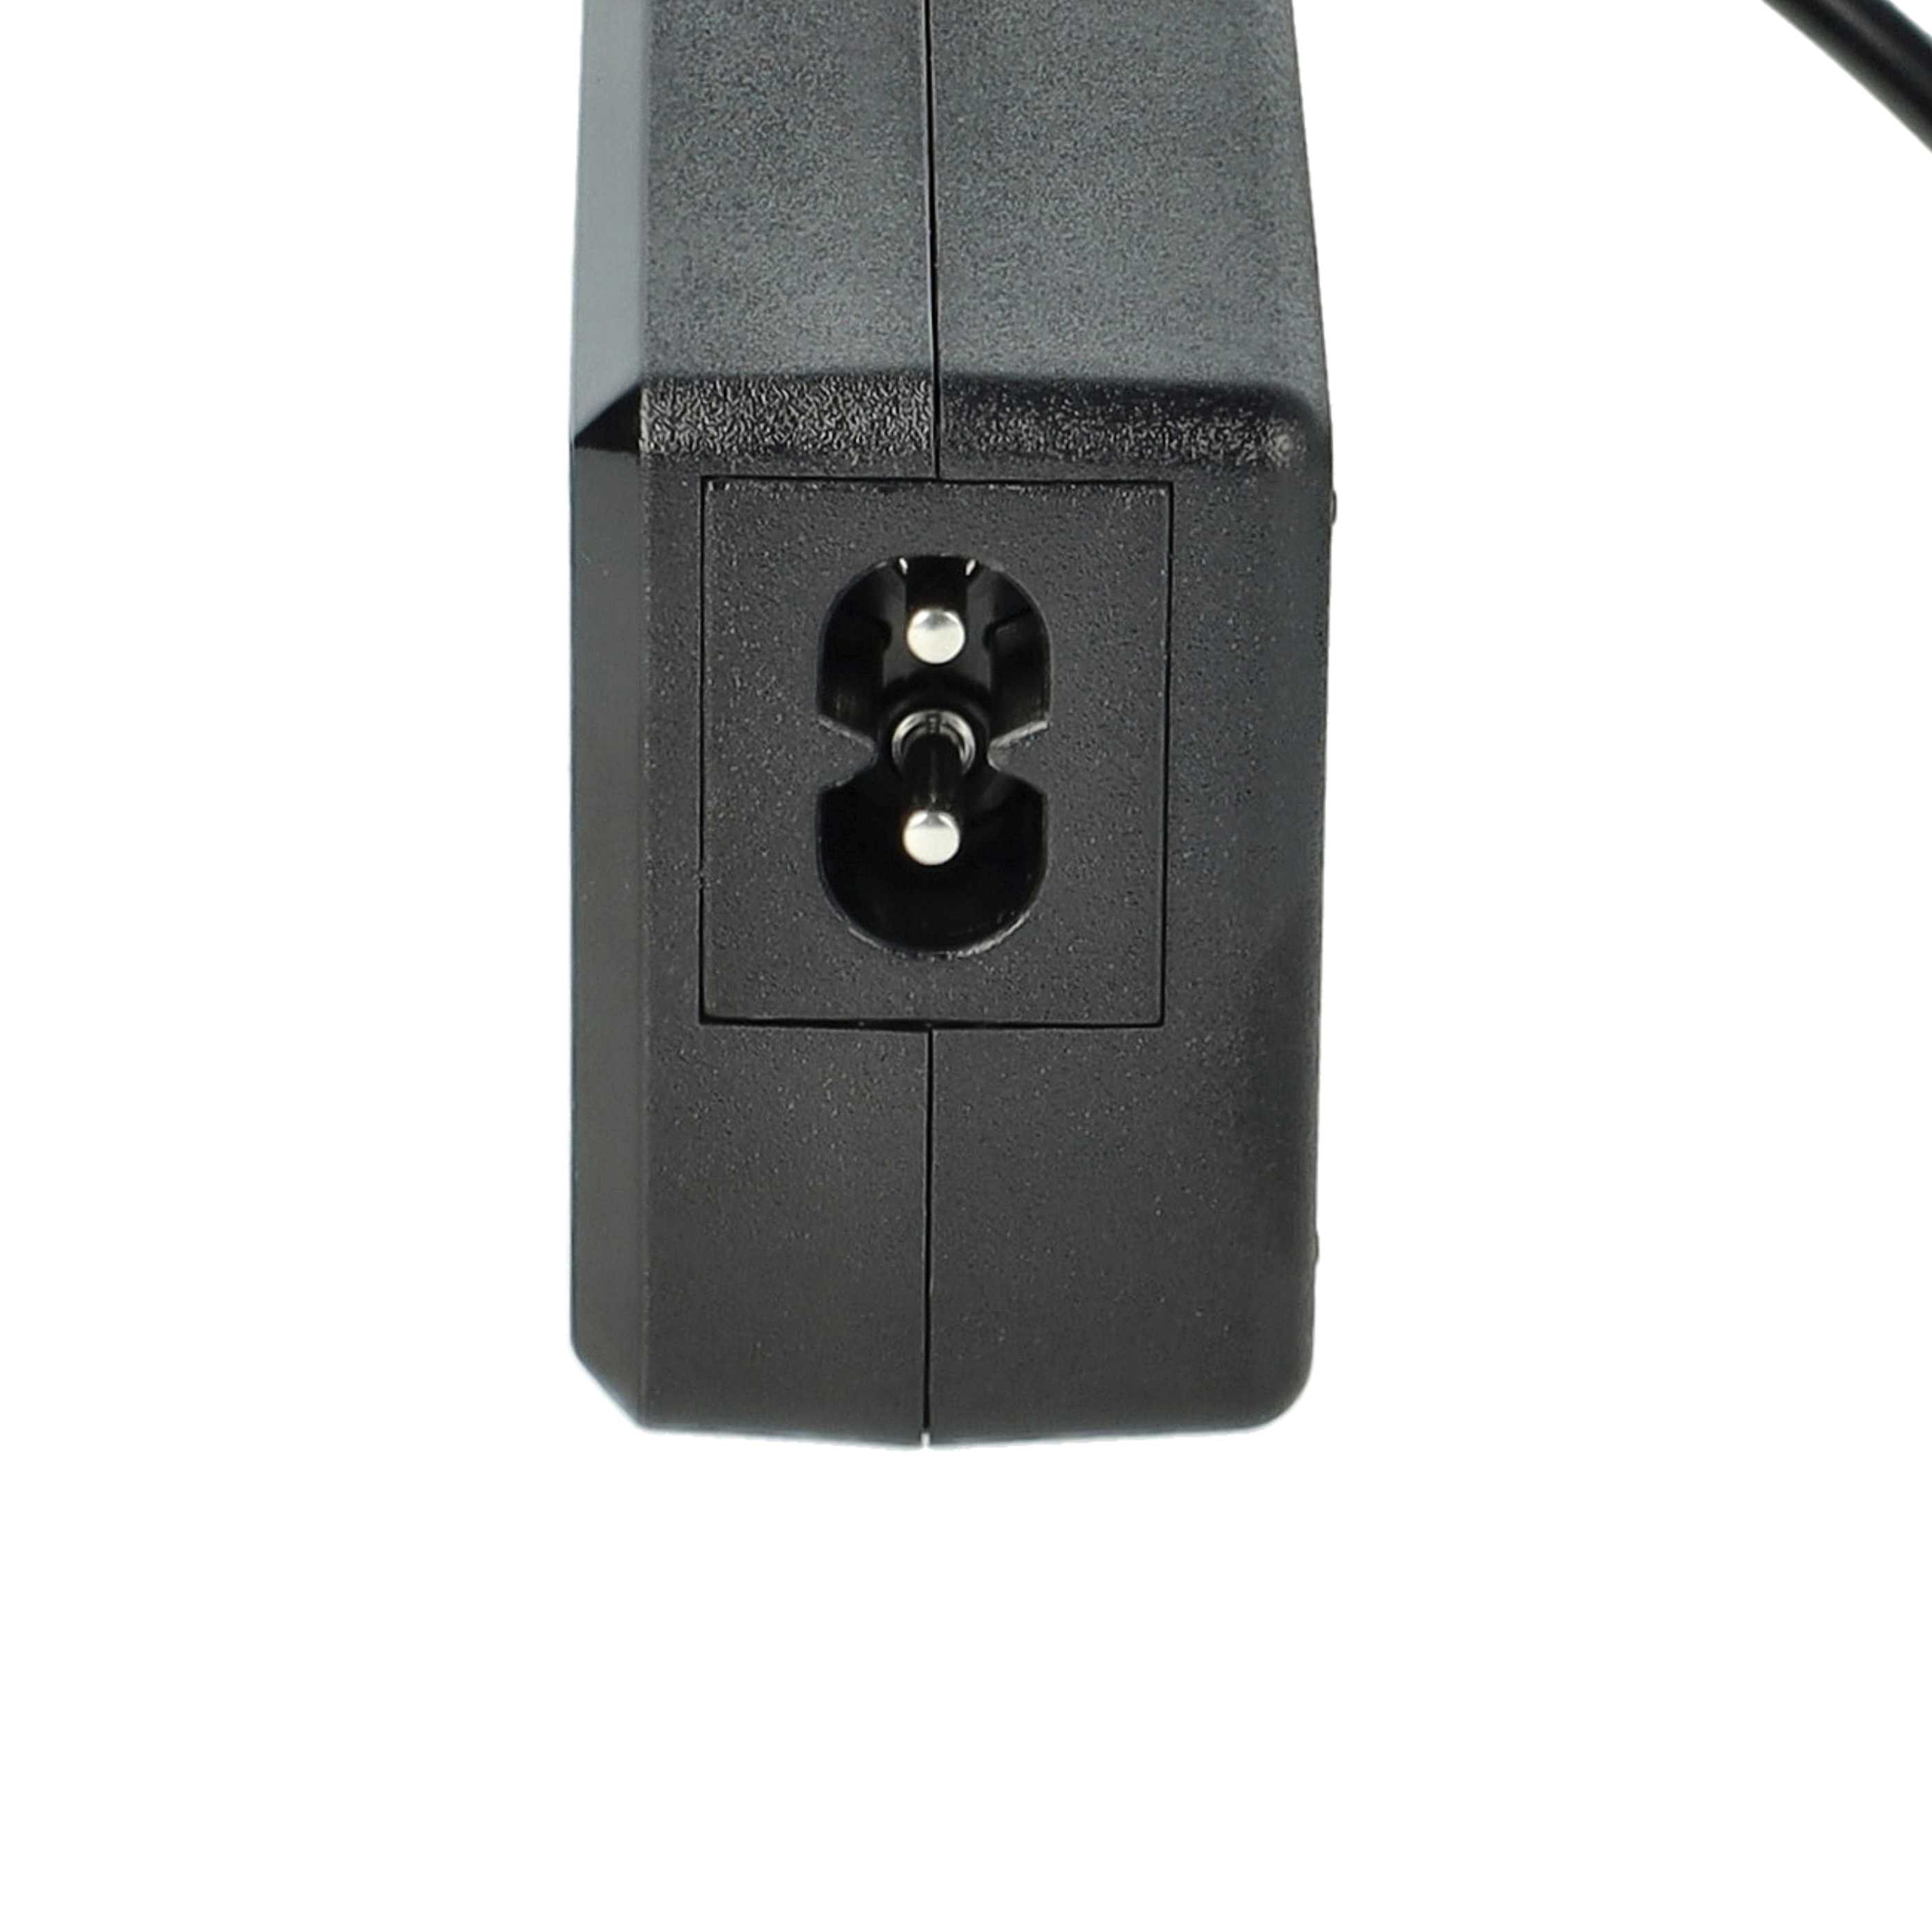 Mains Power Adapter replaces Apple 661-3049, 661-2790, 661-2736, 661-3345 for AppleNotebook, 48 W